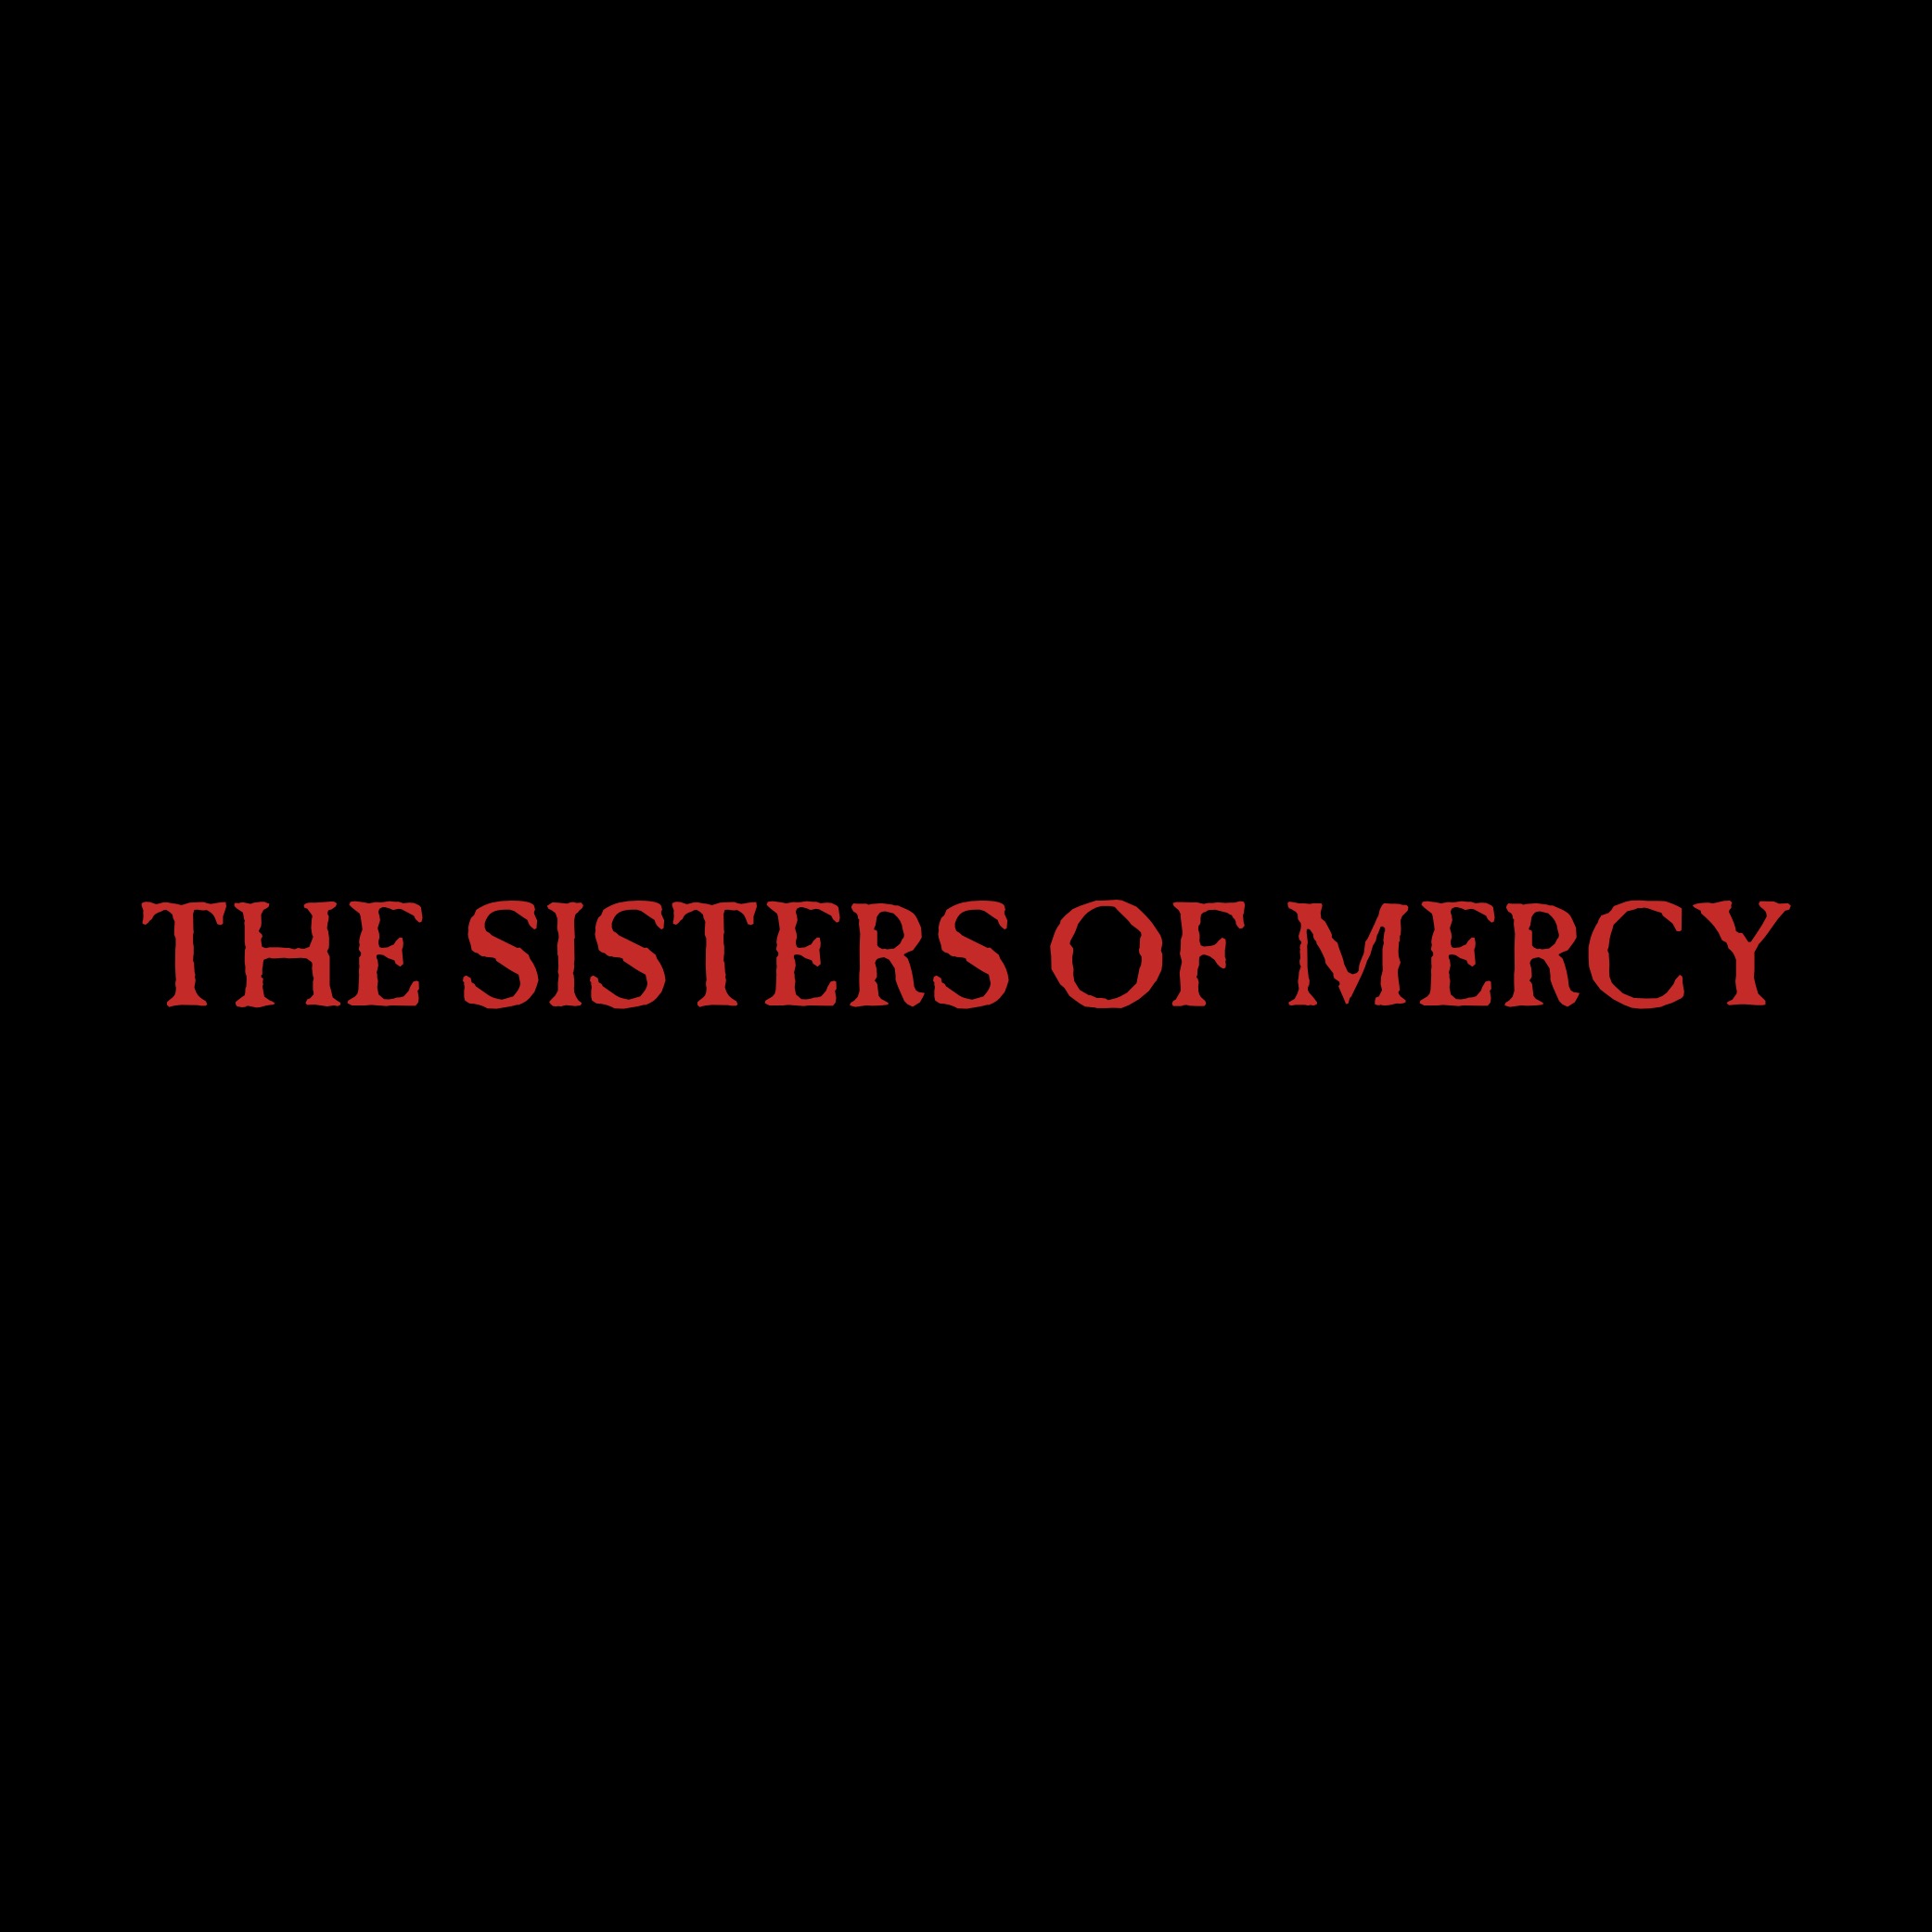 The Sisters of Mercy logo